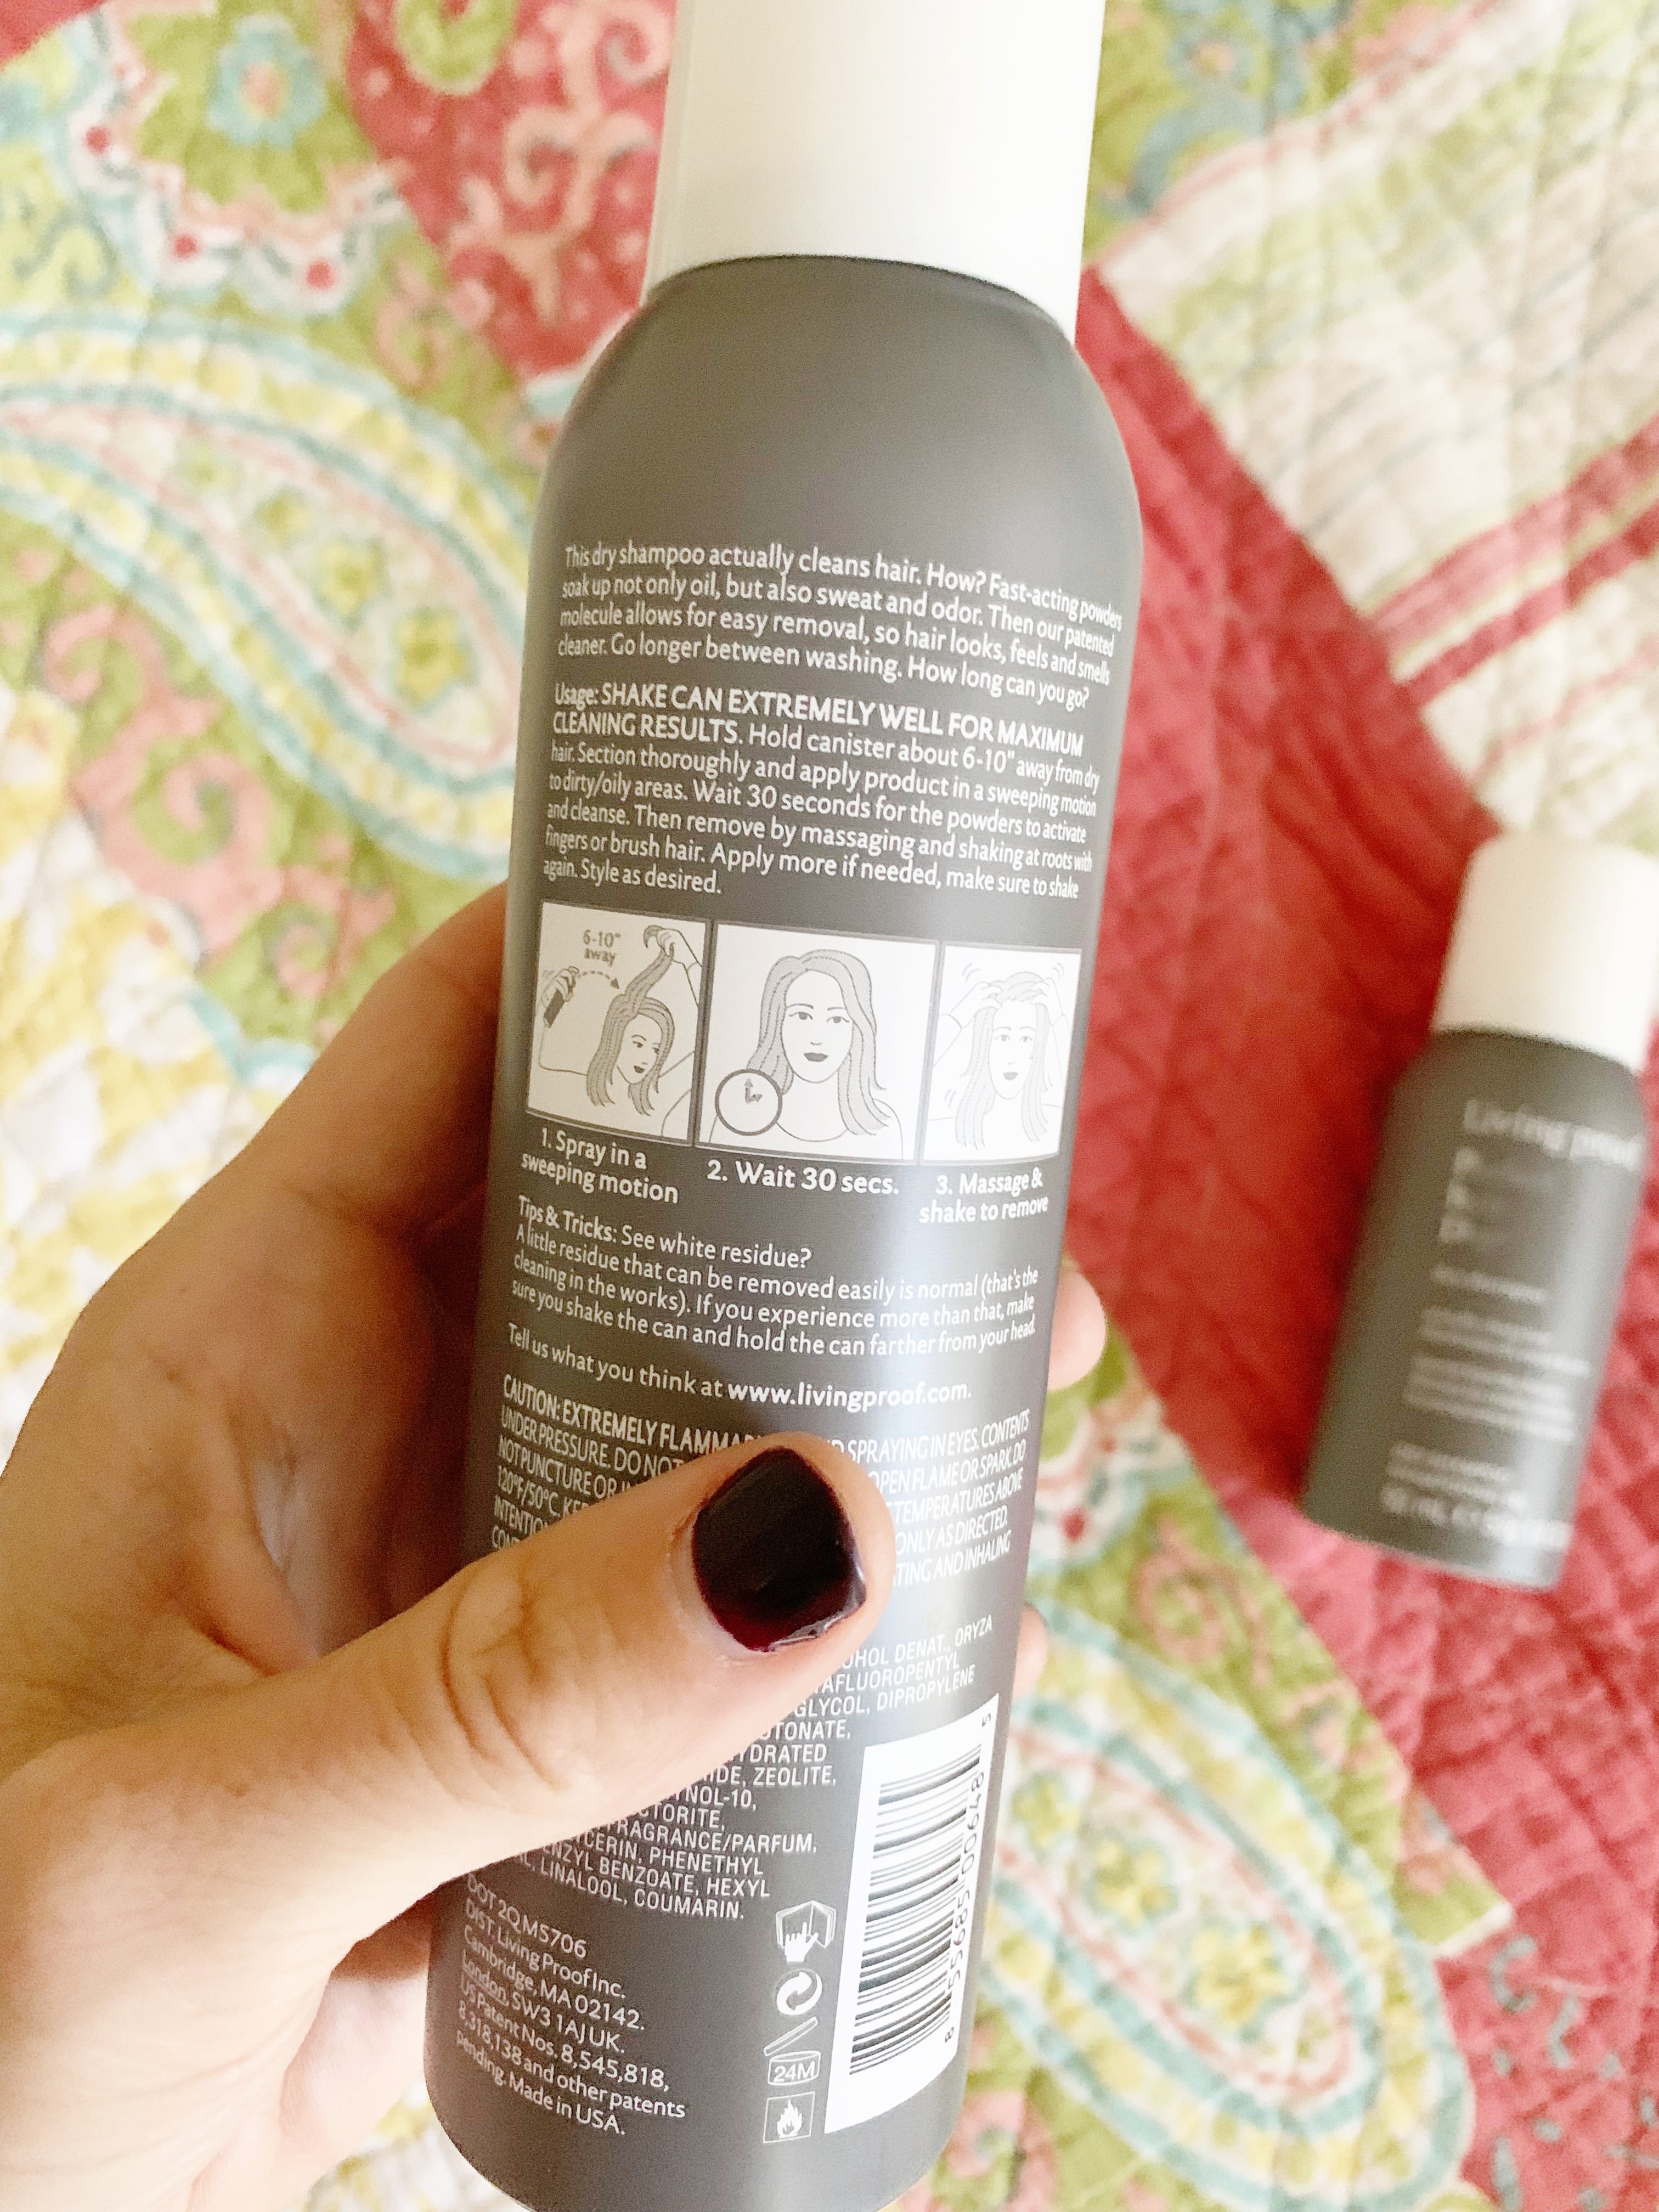 Is Living Proof Dry Shampoo Worth The Price? - Sharing a full review on Living Proof Perfect Hair Day Dry Shampoo and if it's worth purchasing! | Living Proof Dry Shampoo - Living Proof Perfect Hair Day - Living Proof Dry Shampoo Review